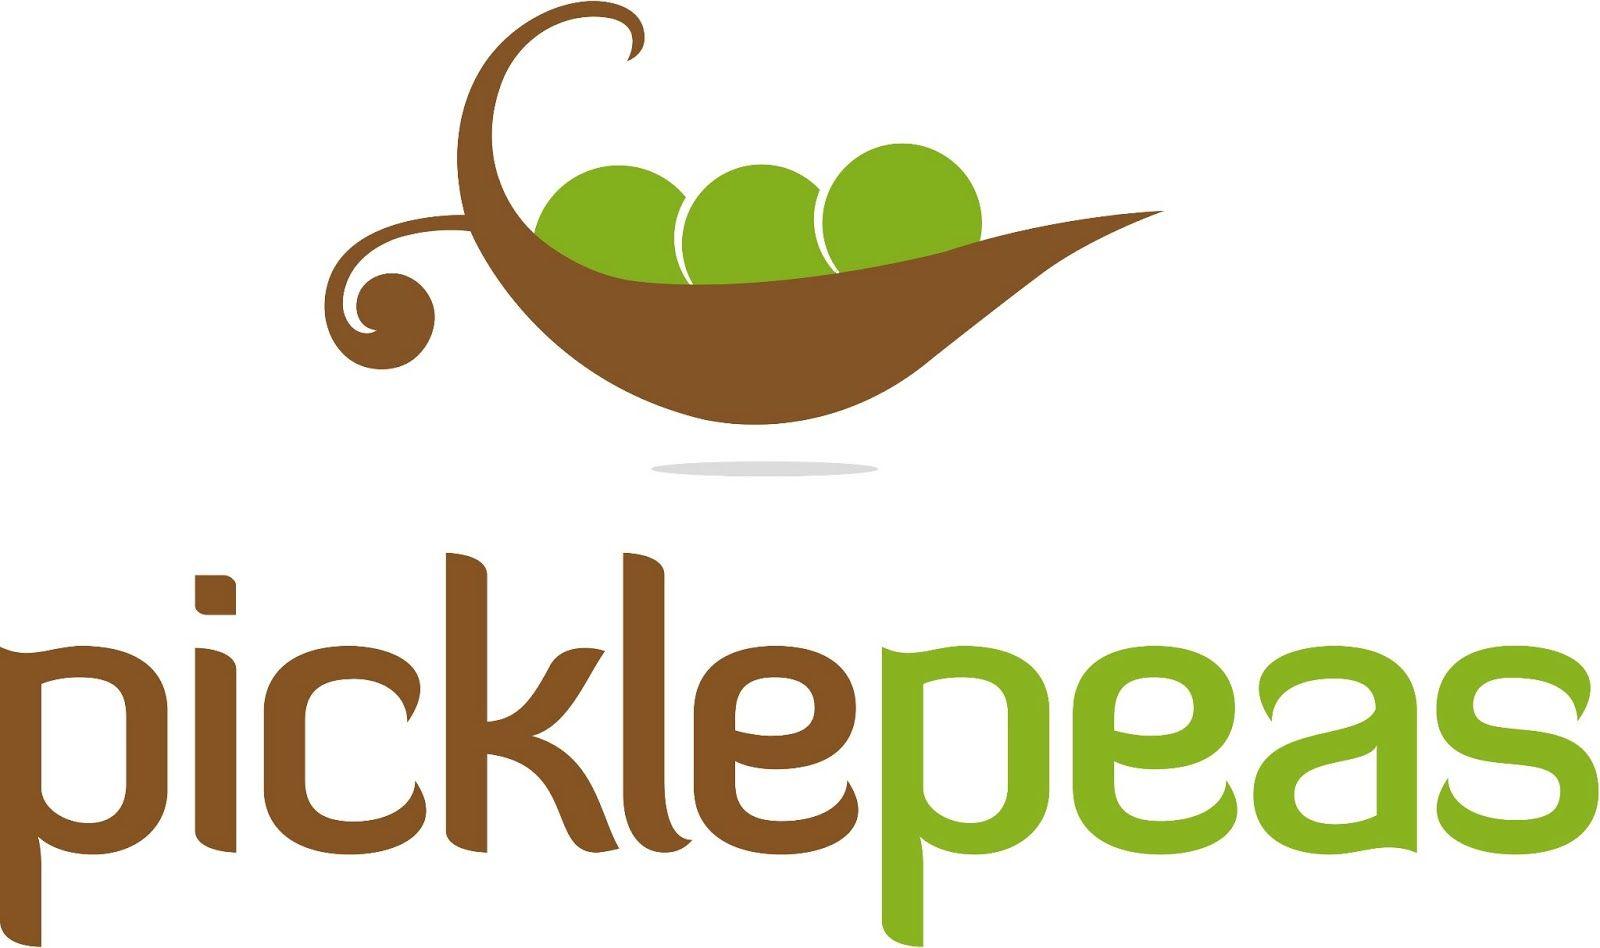 Pickle Logo - Pickle Peas Baby Bibs are Stylish and Keep Clothes Dry